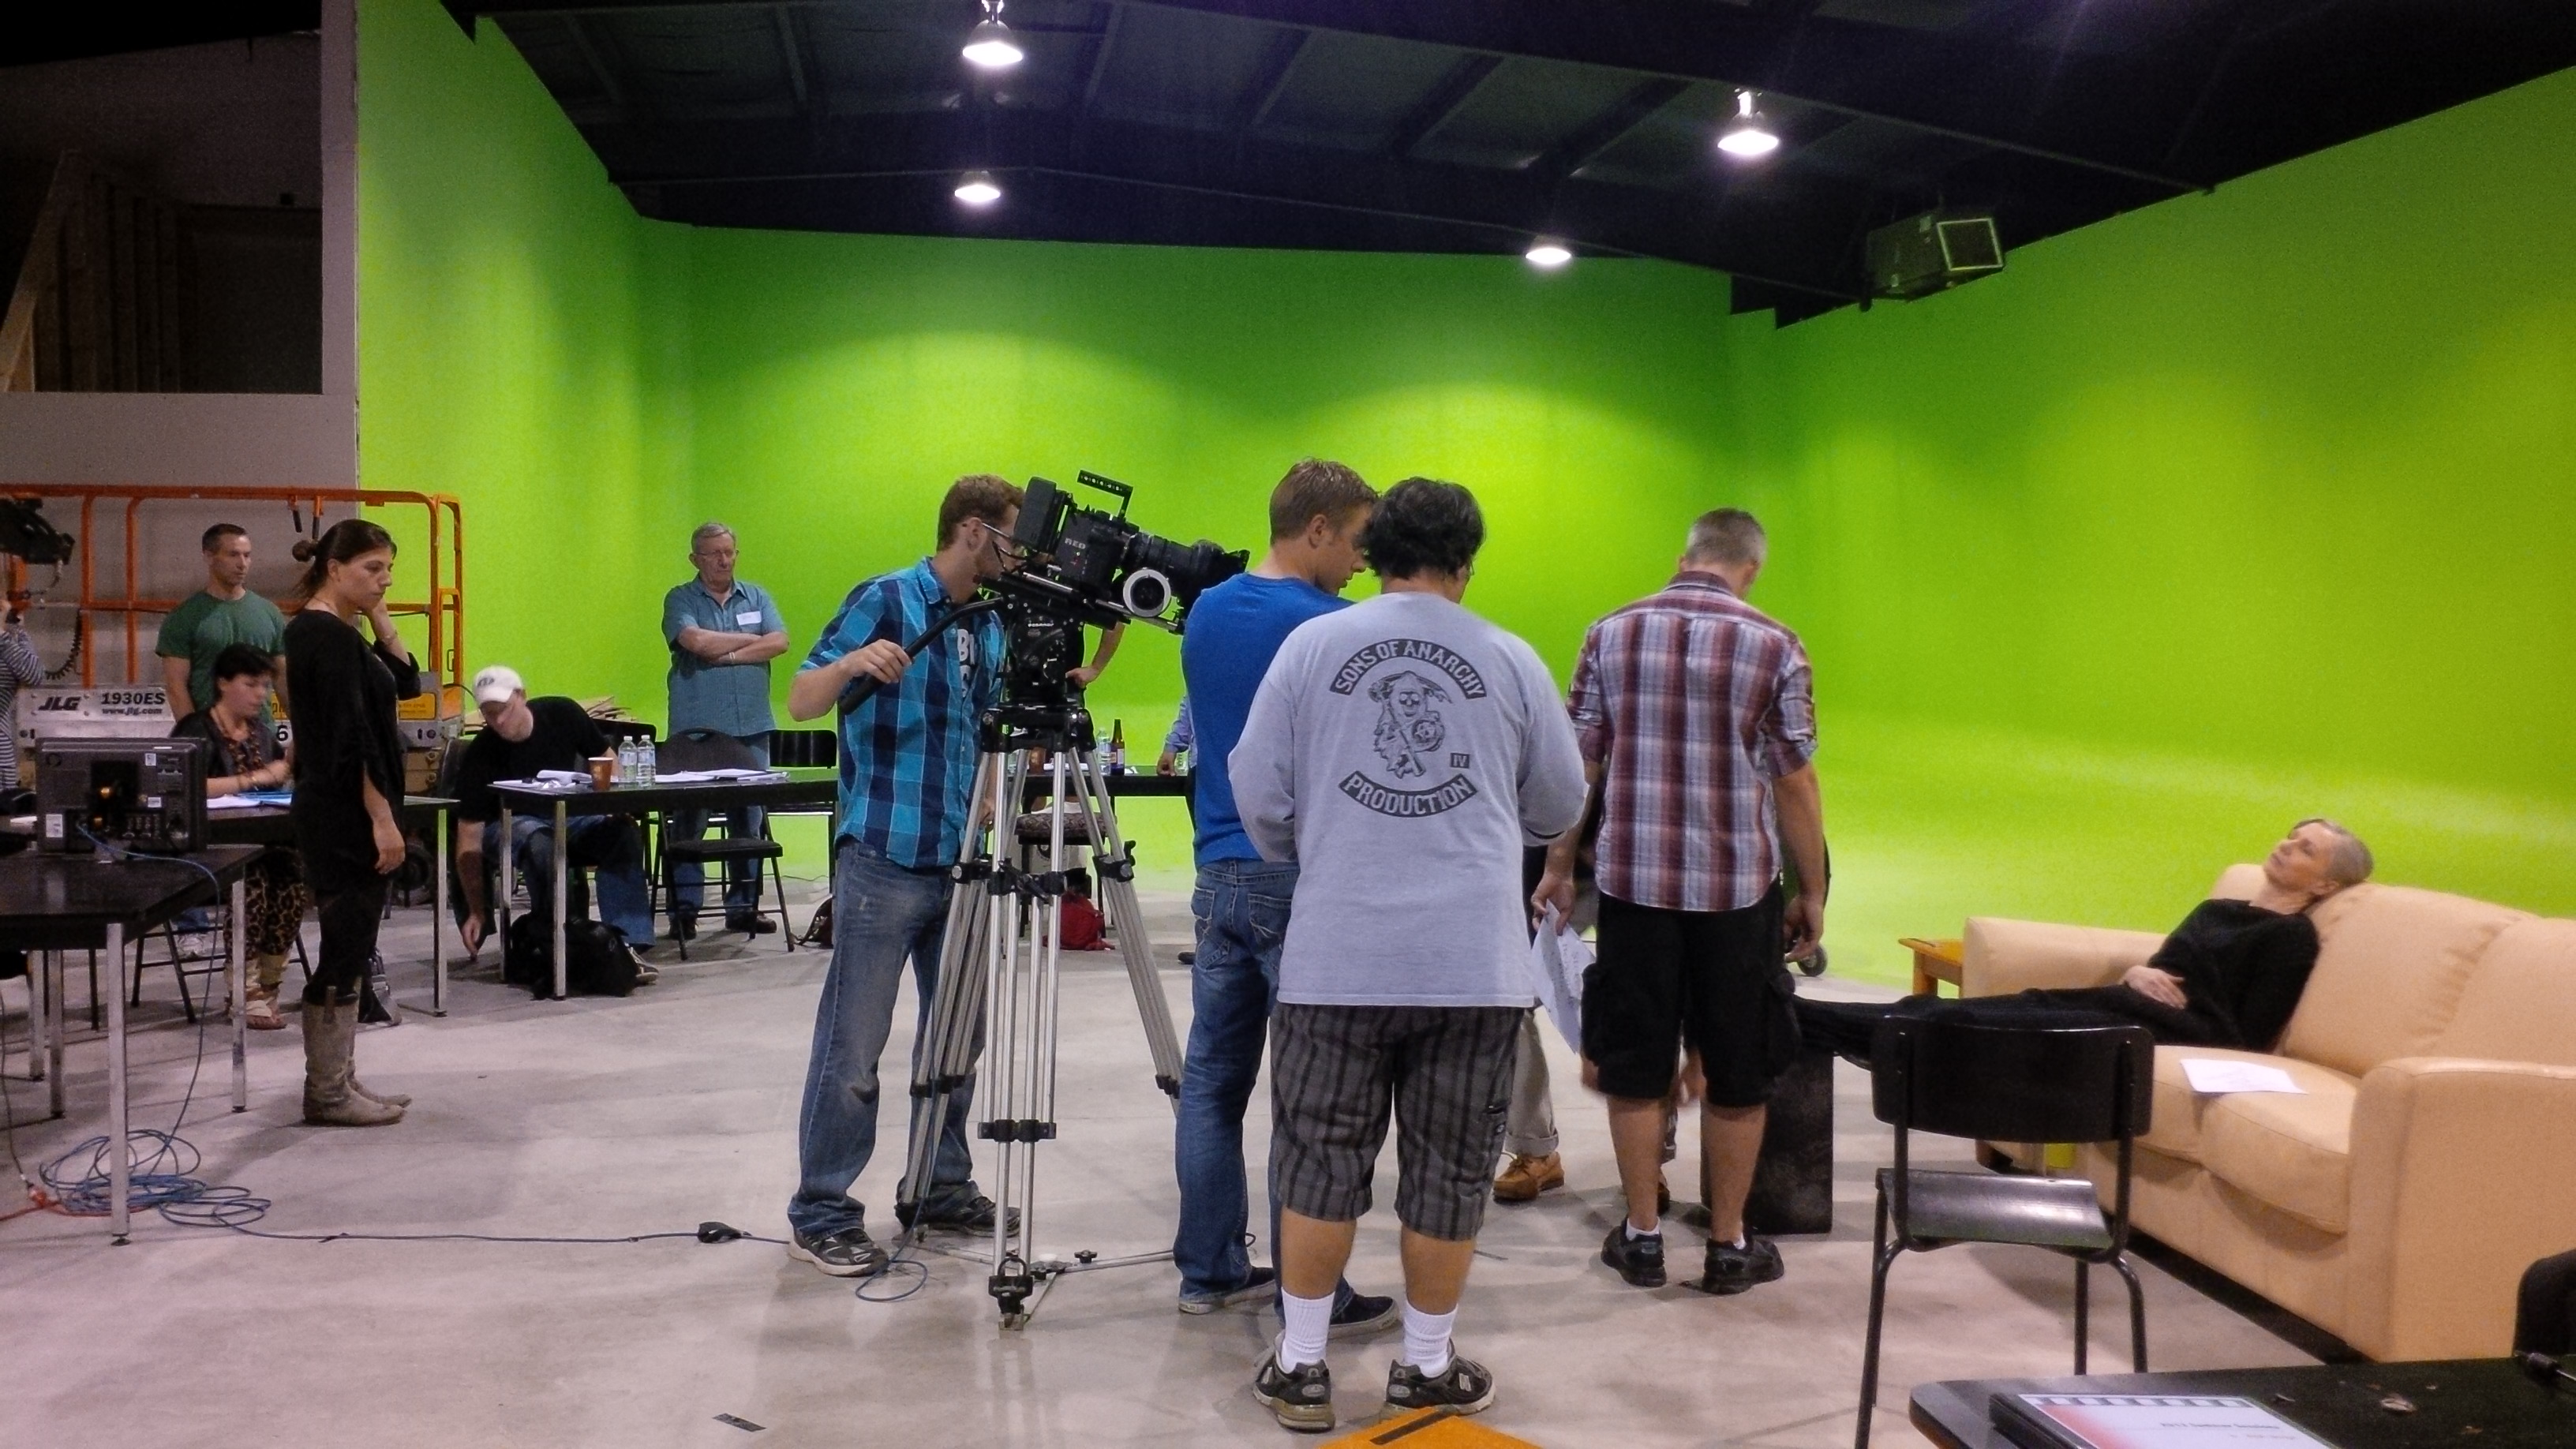 On Saturday, Day 1, Gary helped talk about actors on set from the Production Assistant's point of view.